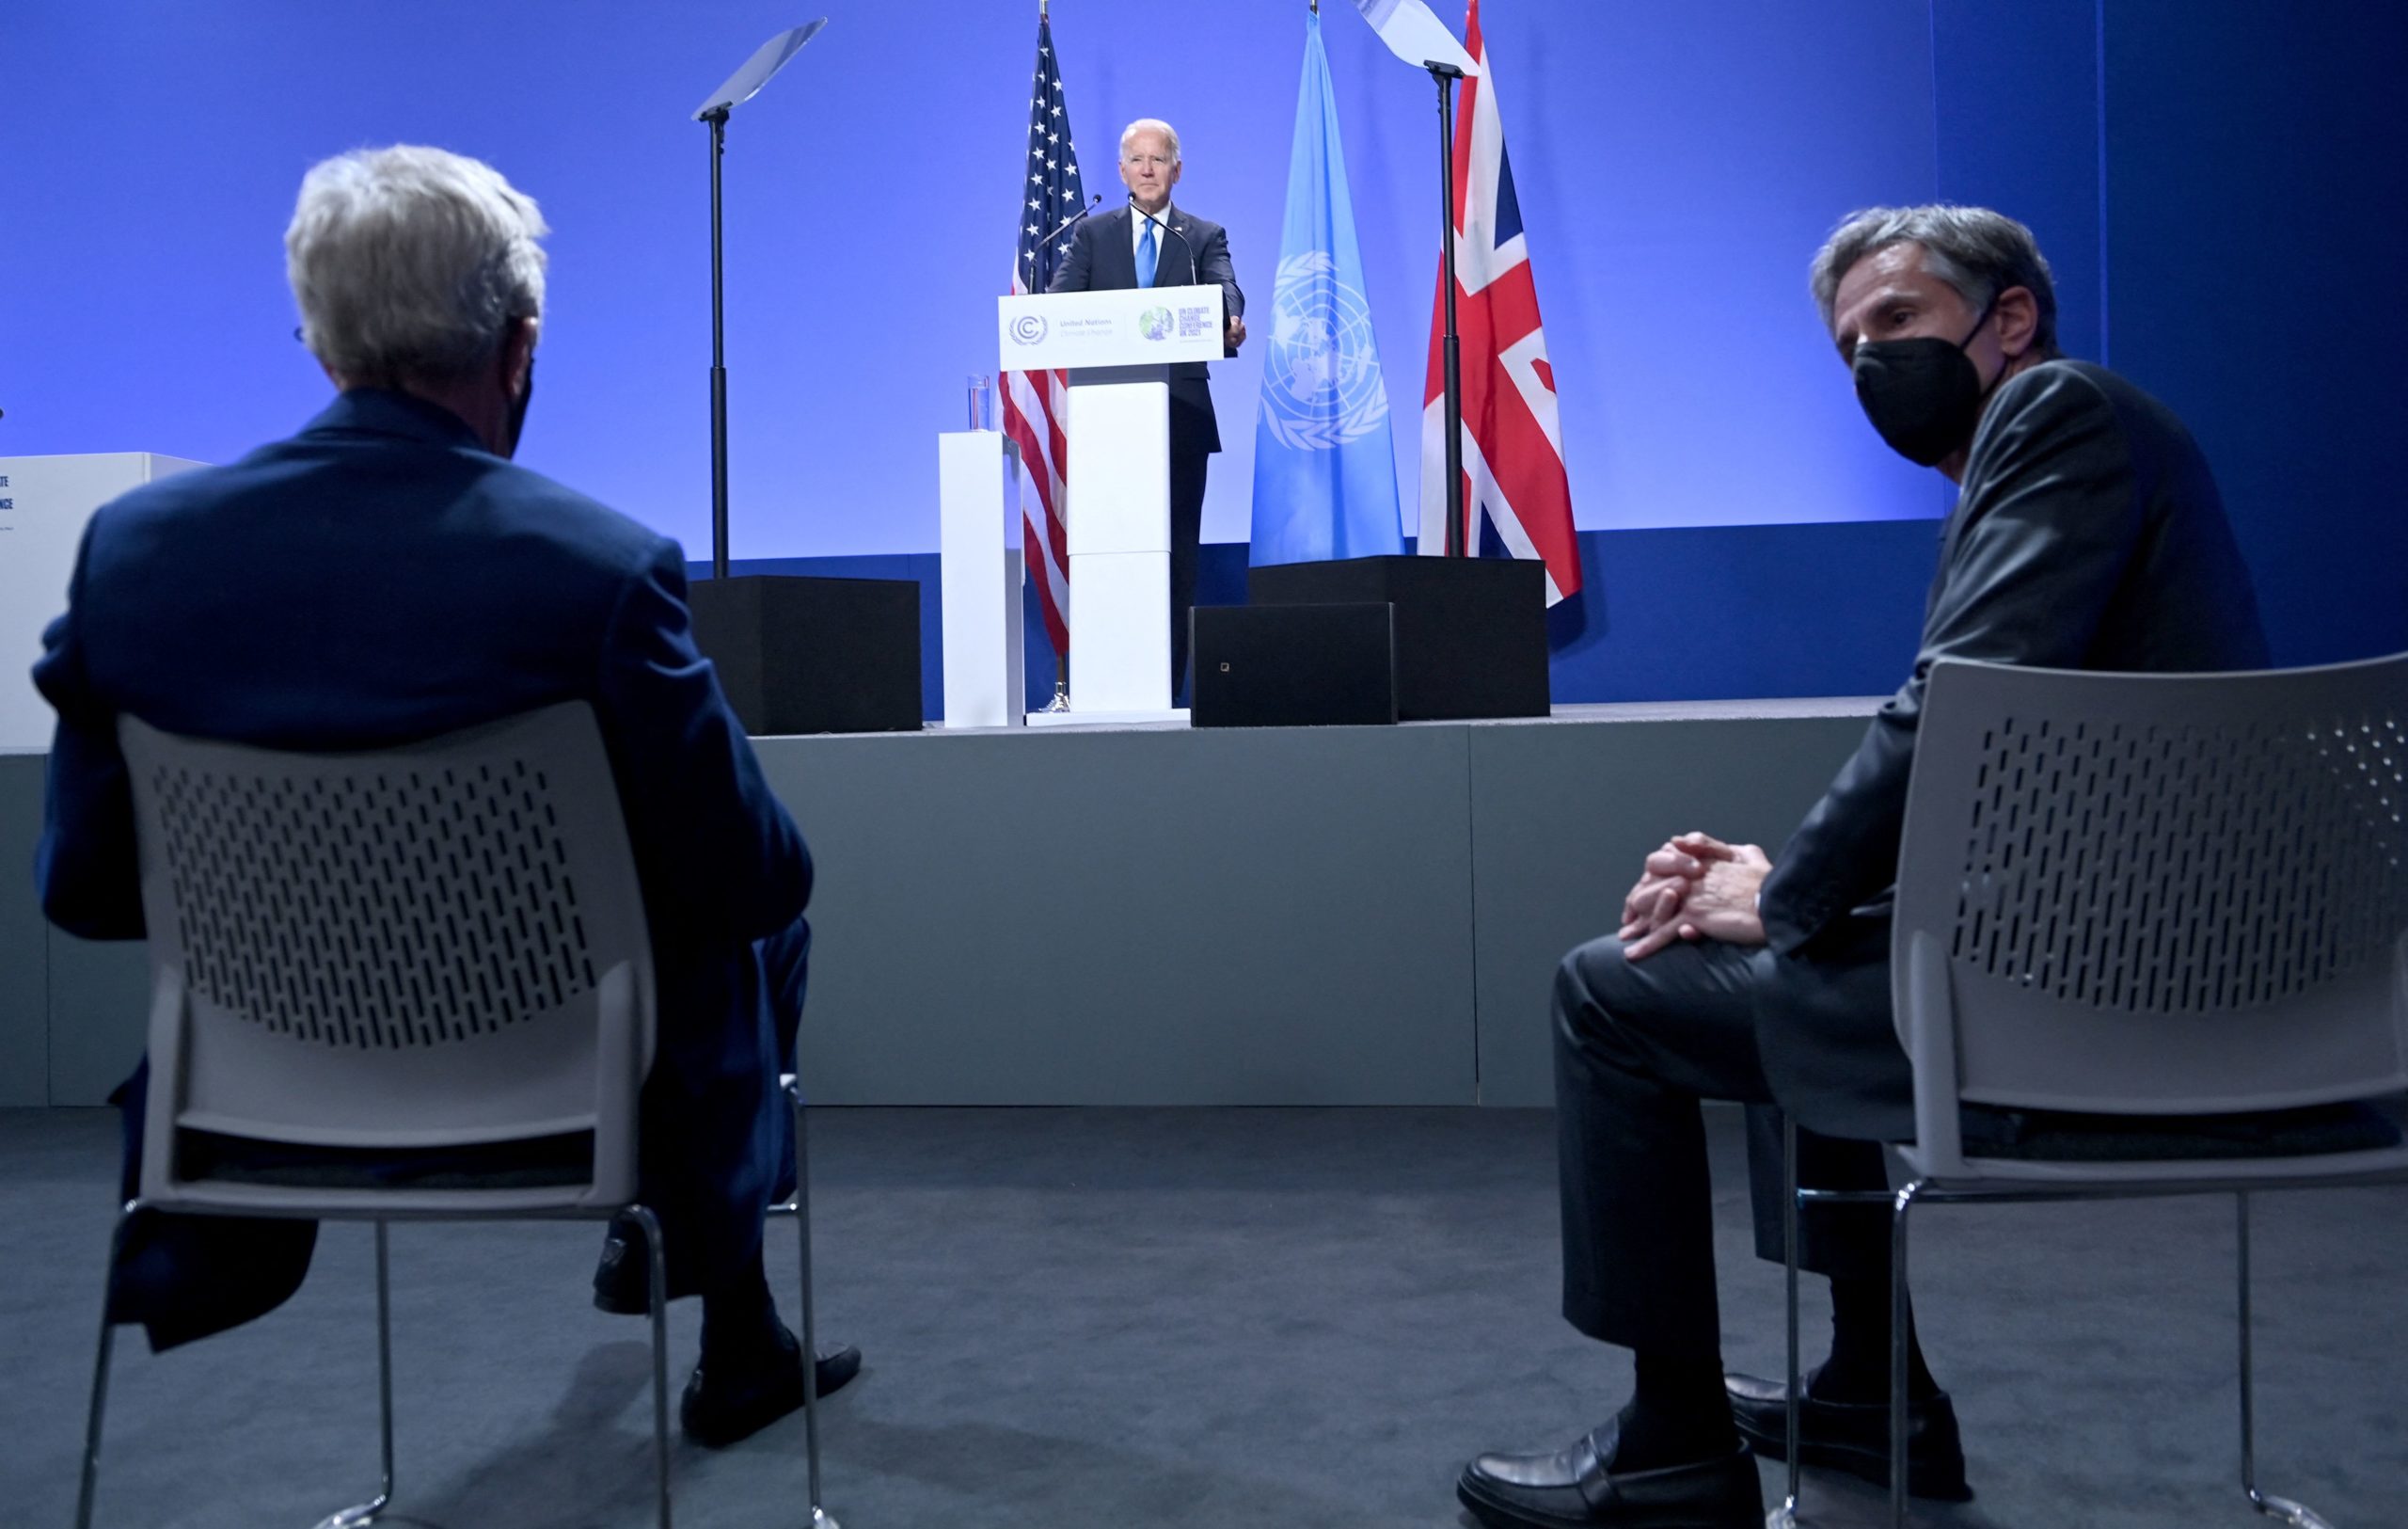 President Joe Biden addresses a press conference as Secretary of State Antony Blinken and Special Presidential Envoy for Climate John Kerry listen at the COP26 summit in Glasgow on Nov. 2. (Brendan Smialowski/AFP via Getty Images)